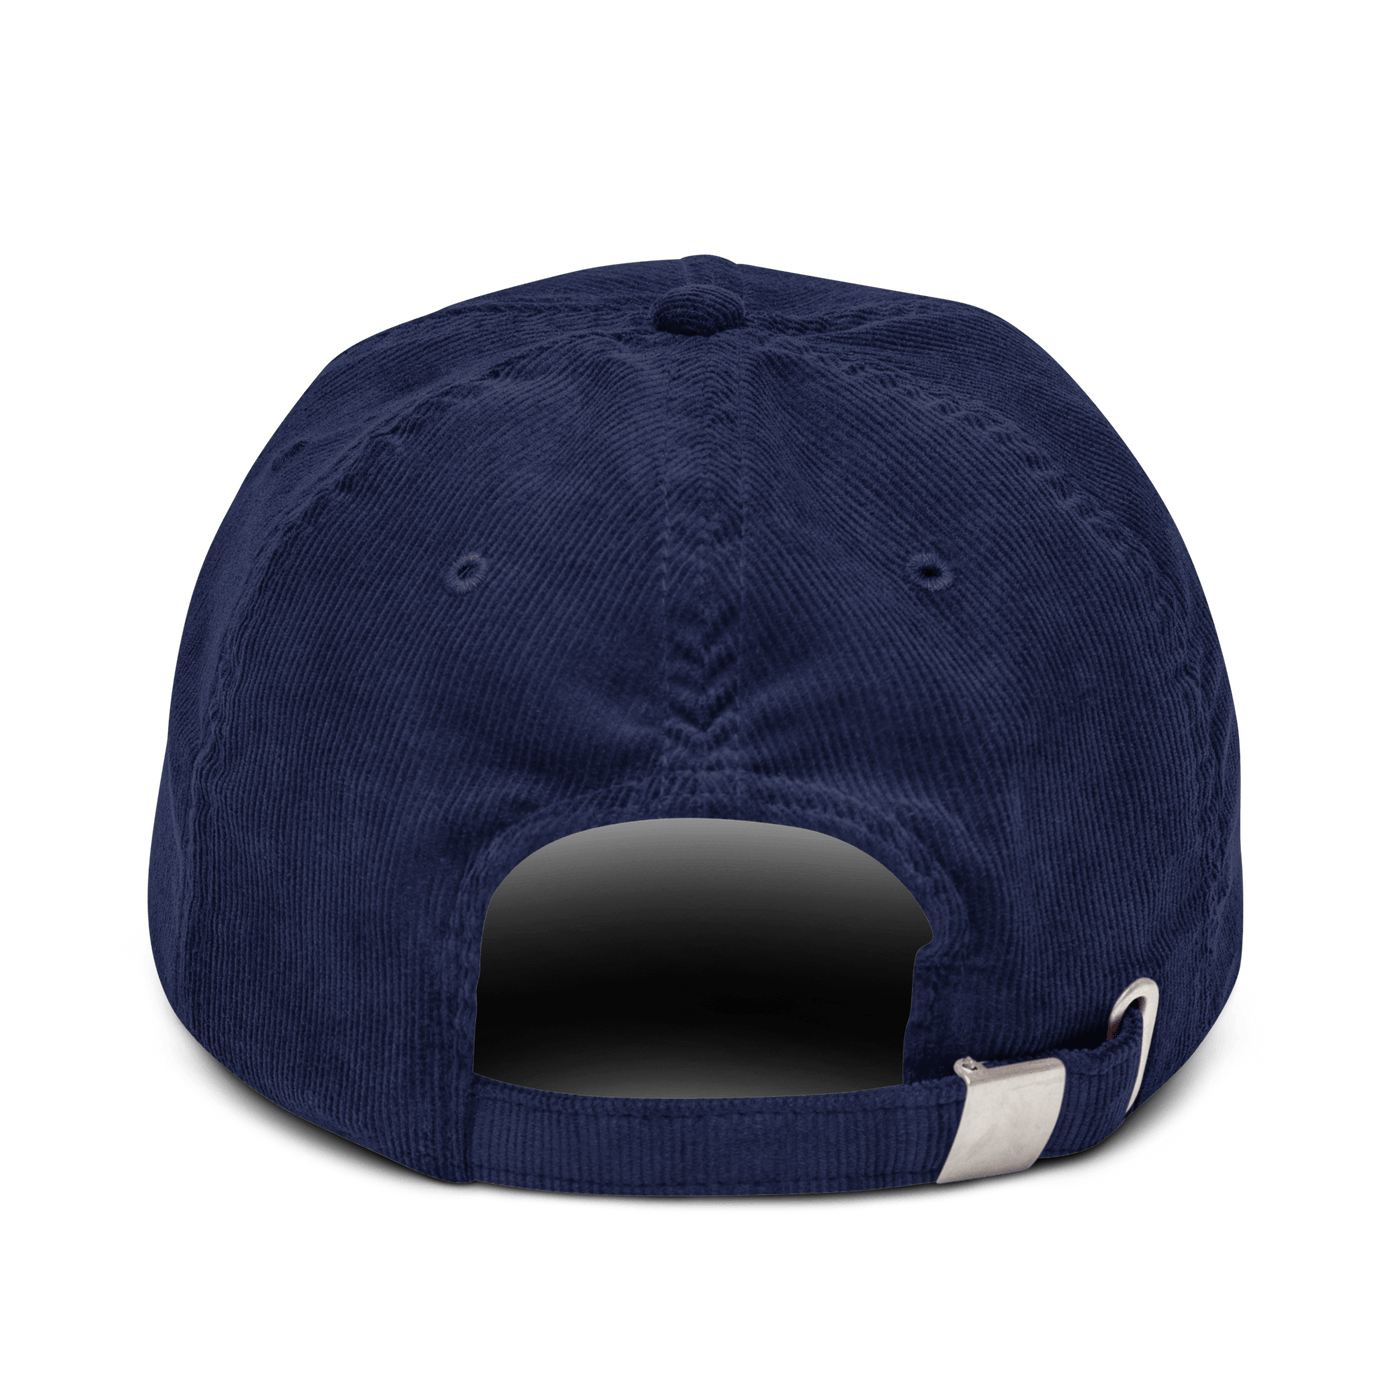 Life Happens Coffee Helps Corduroy hat - Oxford Navy - - Just Another Cap Store